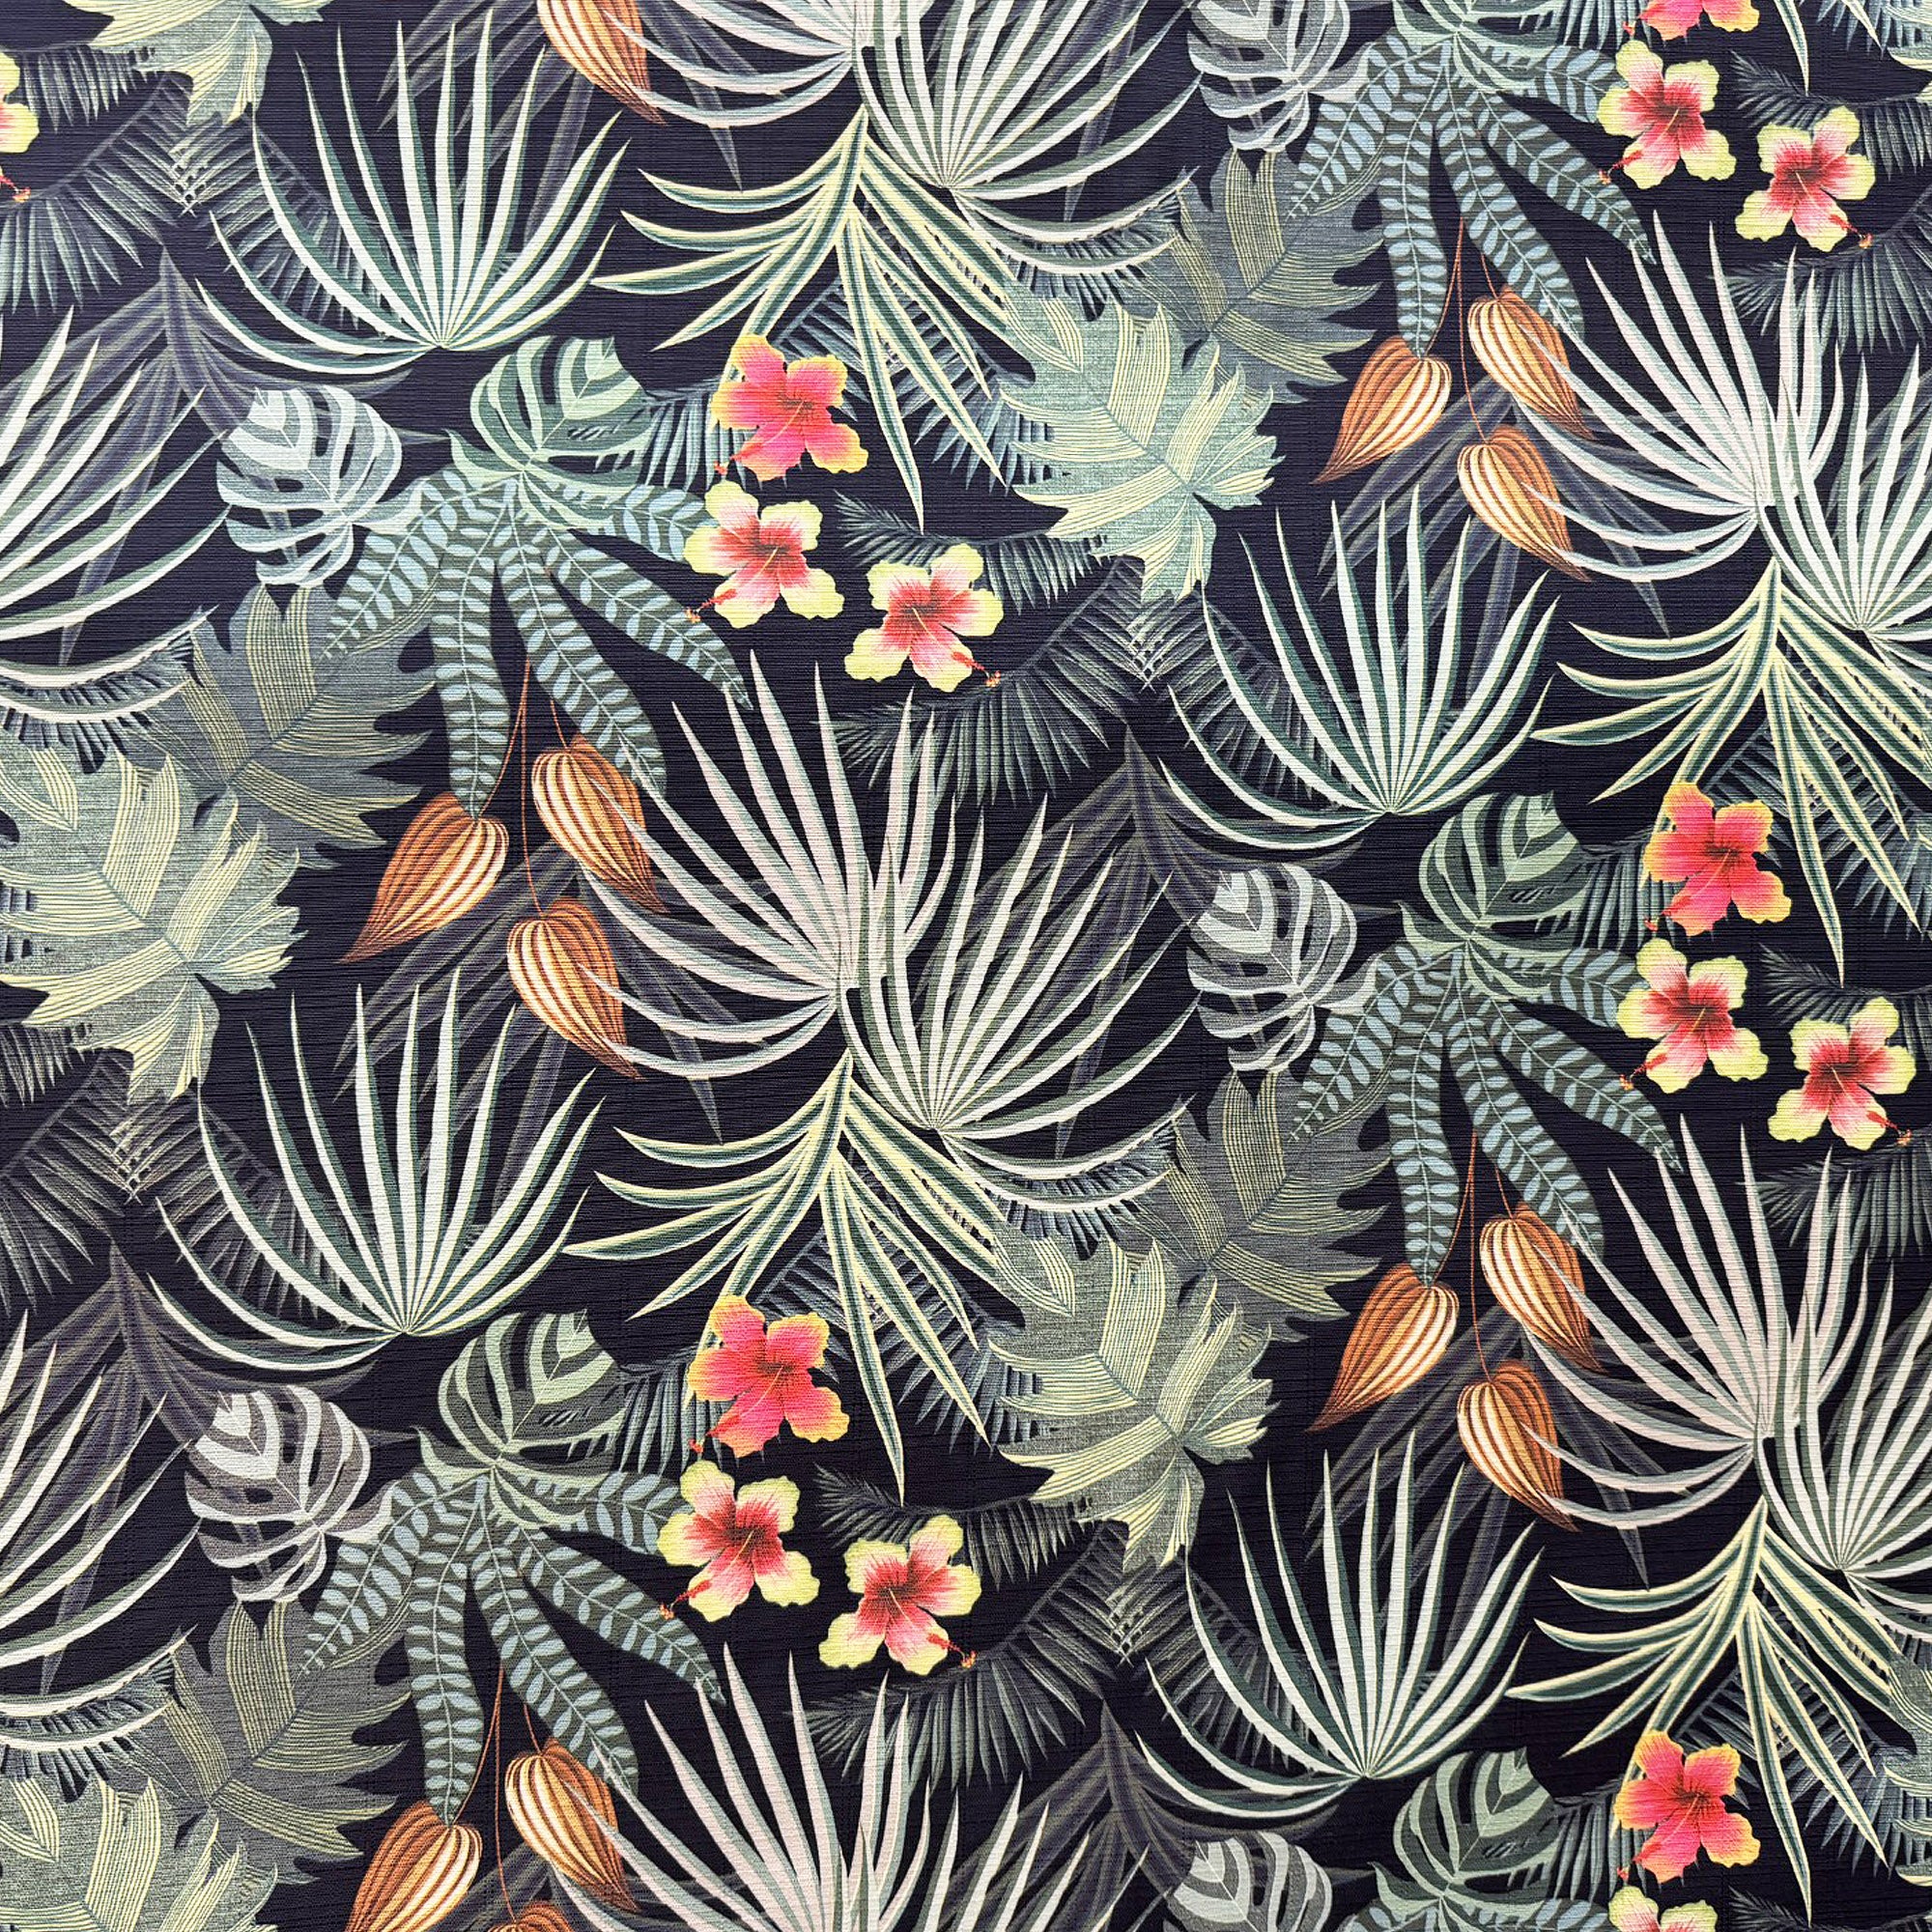 Dominica Fabric | Outdoor Floral Fabric